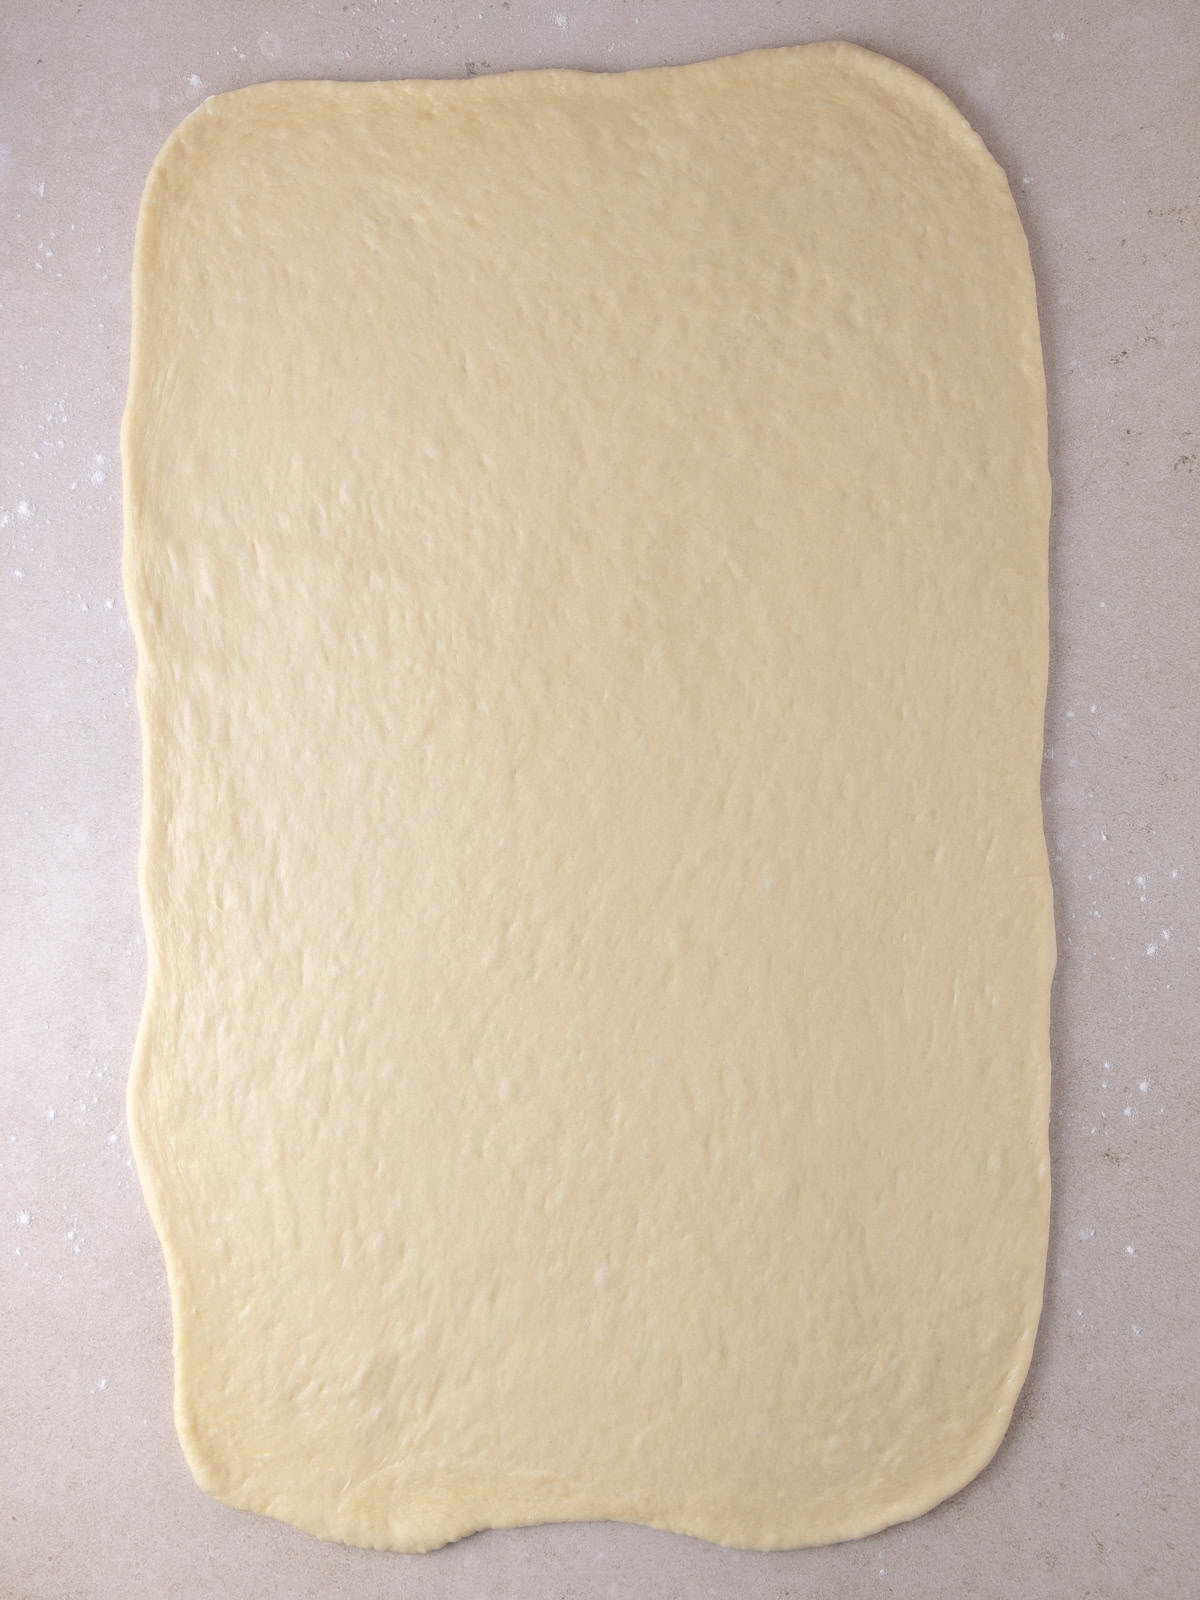 Dough has been punch down and rolled out to roughly a 16x24 inch rectangle.